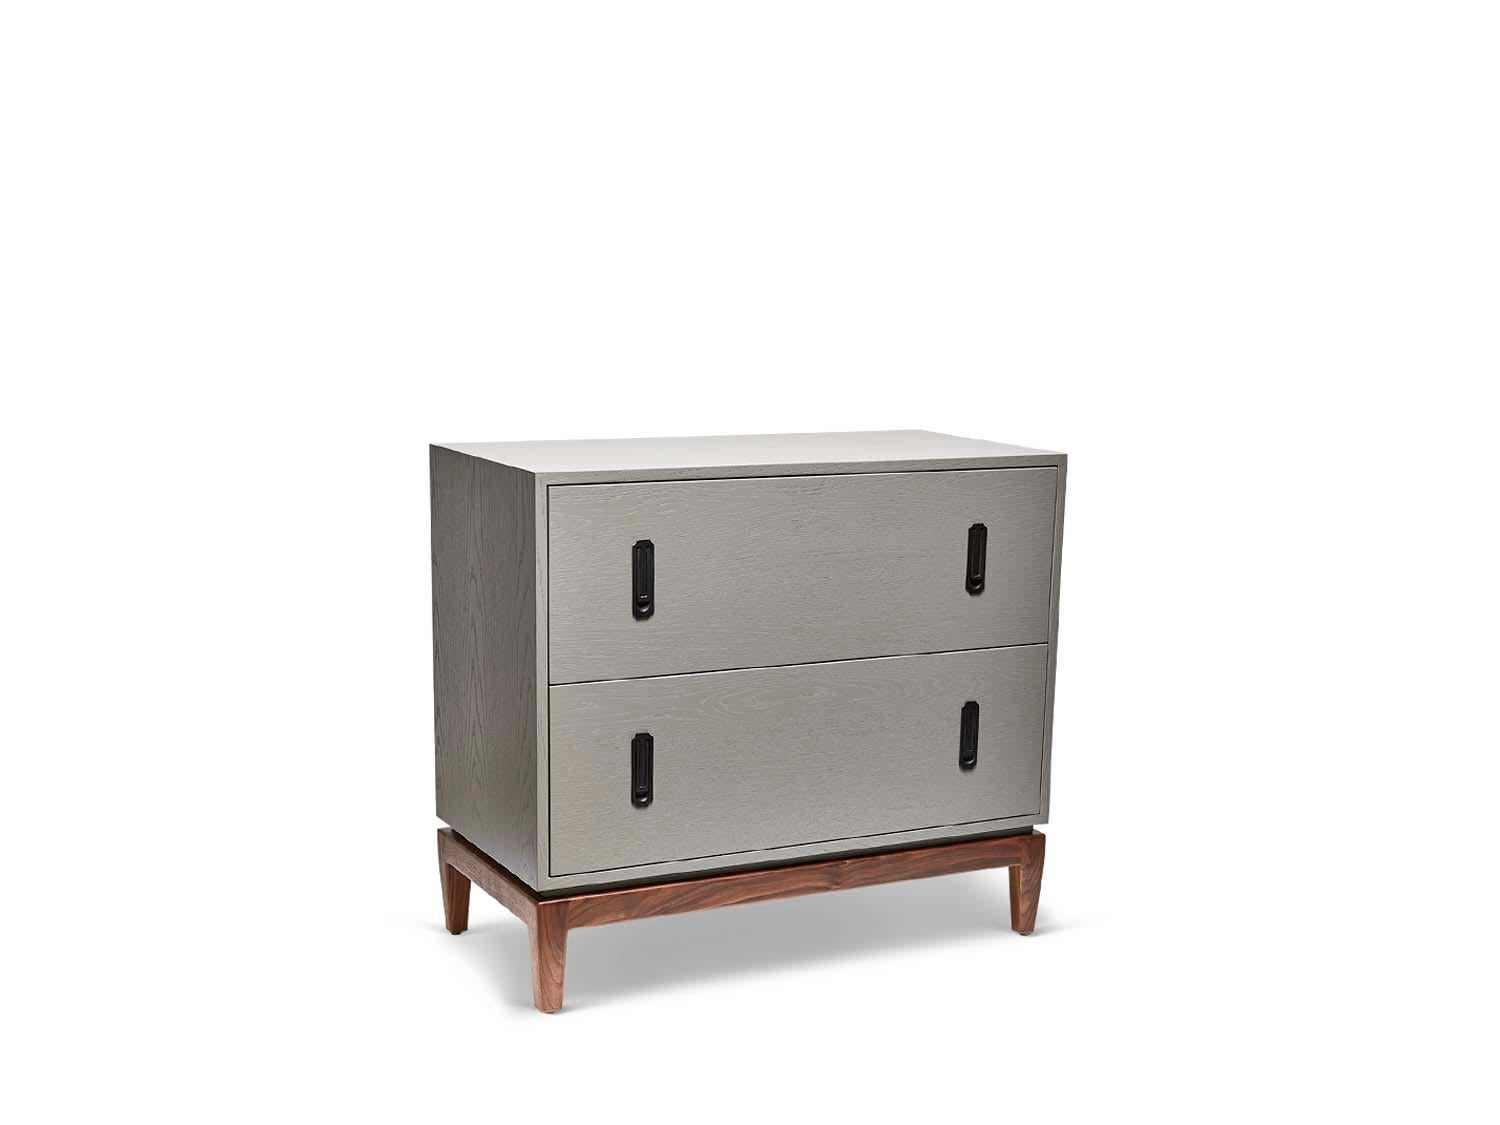 The 2-drawer Arcadia chest features two drawers, handcrafted vintage style hardware and a sculptural solid American walnut or white oak base.

The Lawson-Fenning Collection is designed and handmade in Los Angeles, California. Reach out to discover